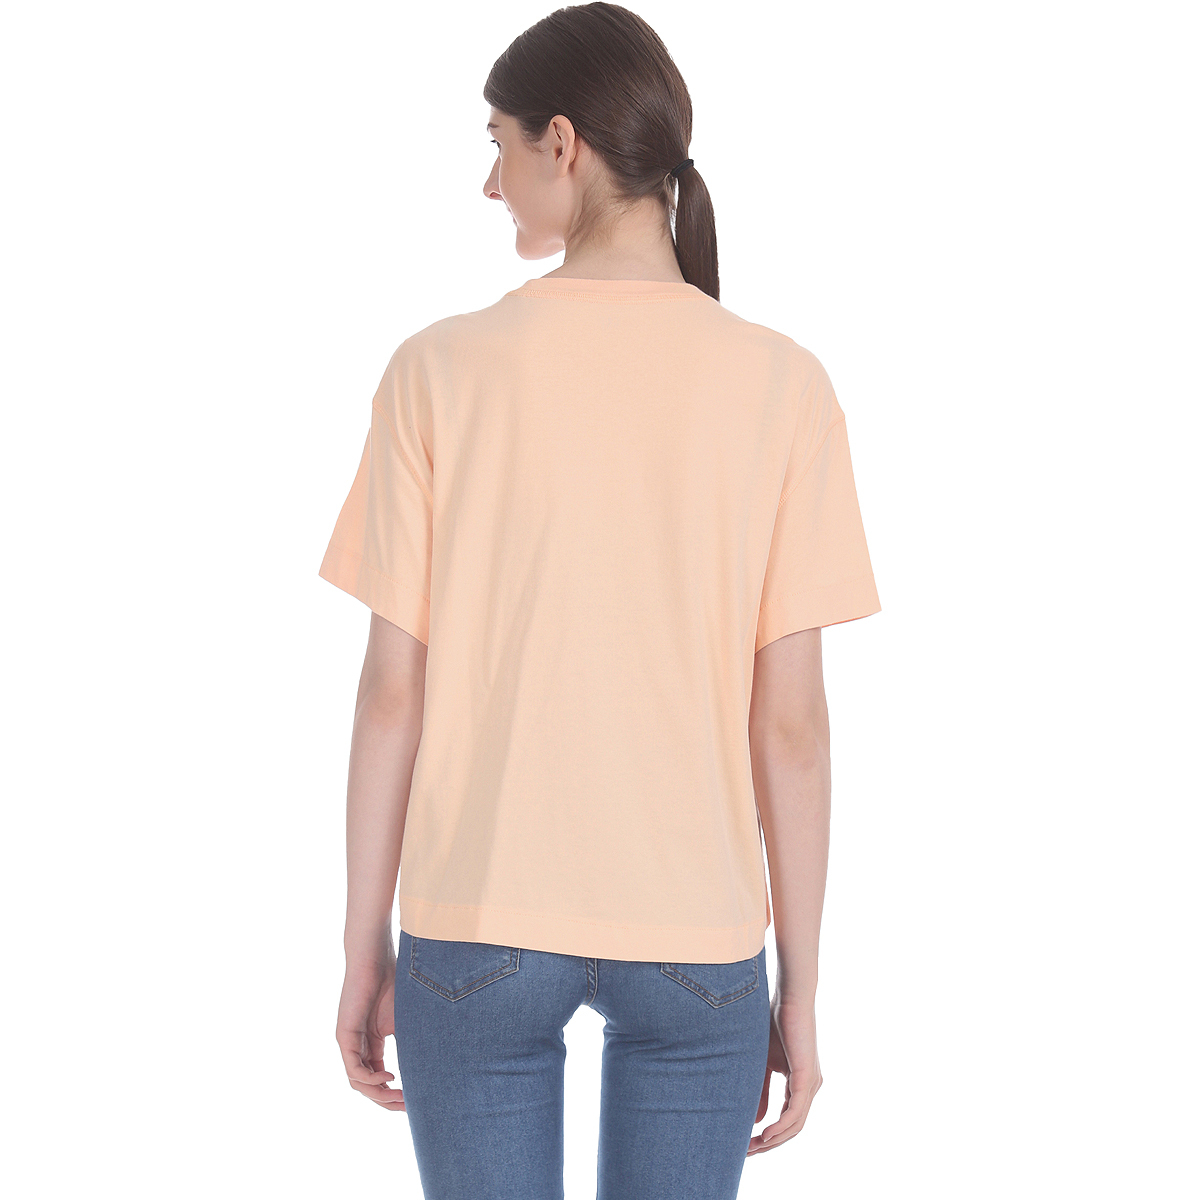 Gap Solid Color Boxy Fit Drop Shoulder T-Shirt Styled with Cropped Hem & Logo-Flag Graphic Print - Peach